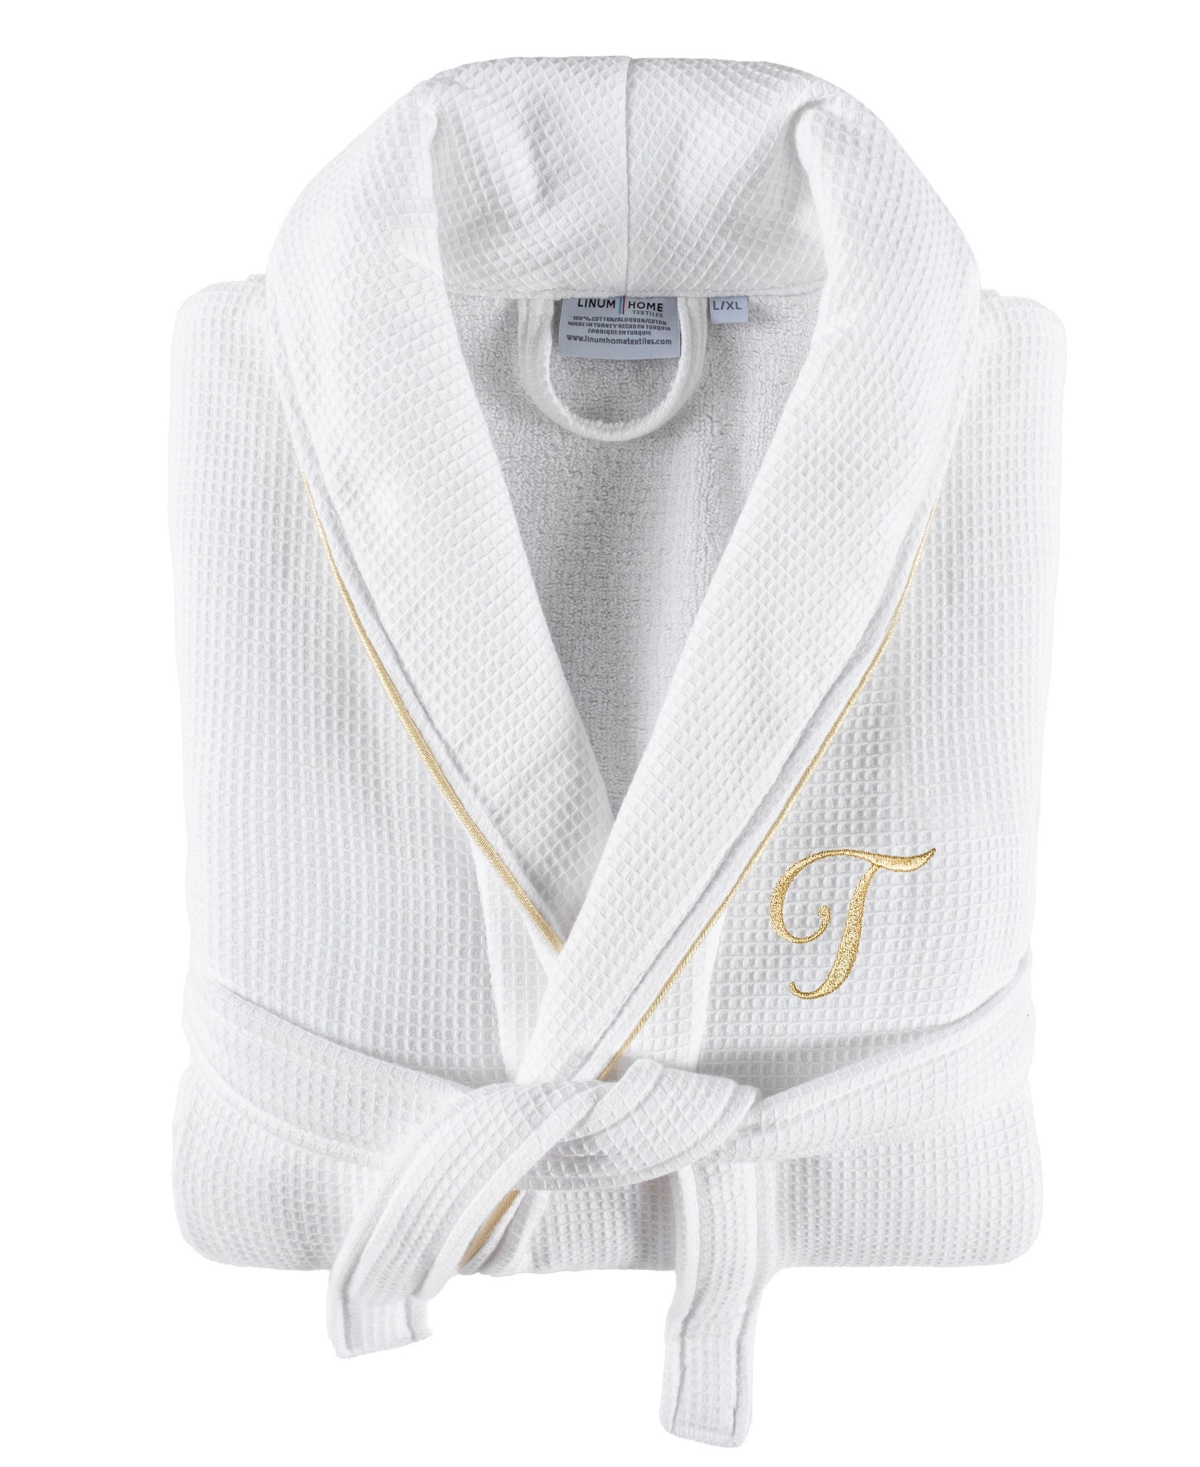 Linum Home Textiles 100% Turkish Cotton Unisex Personalized Waffle Weave Terry Bathrobe With Satin Piped Trim In White T